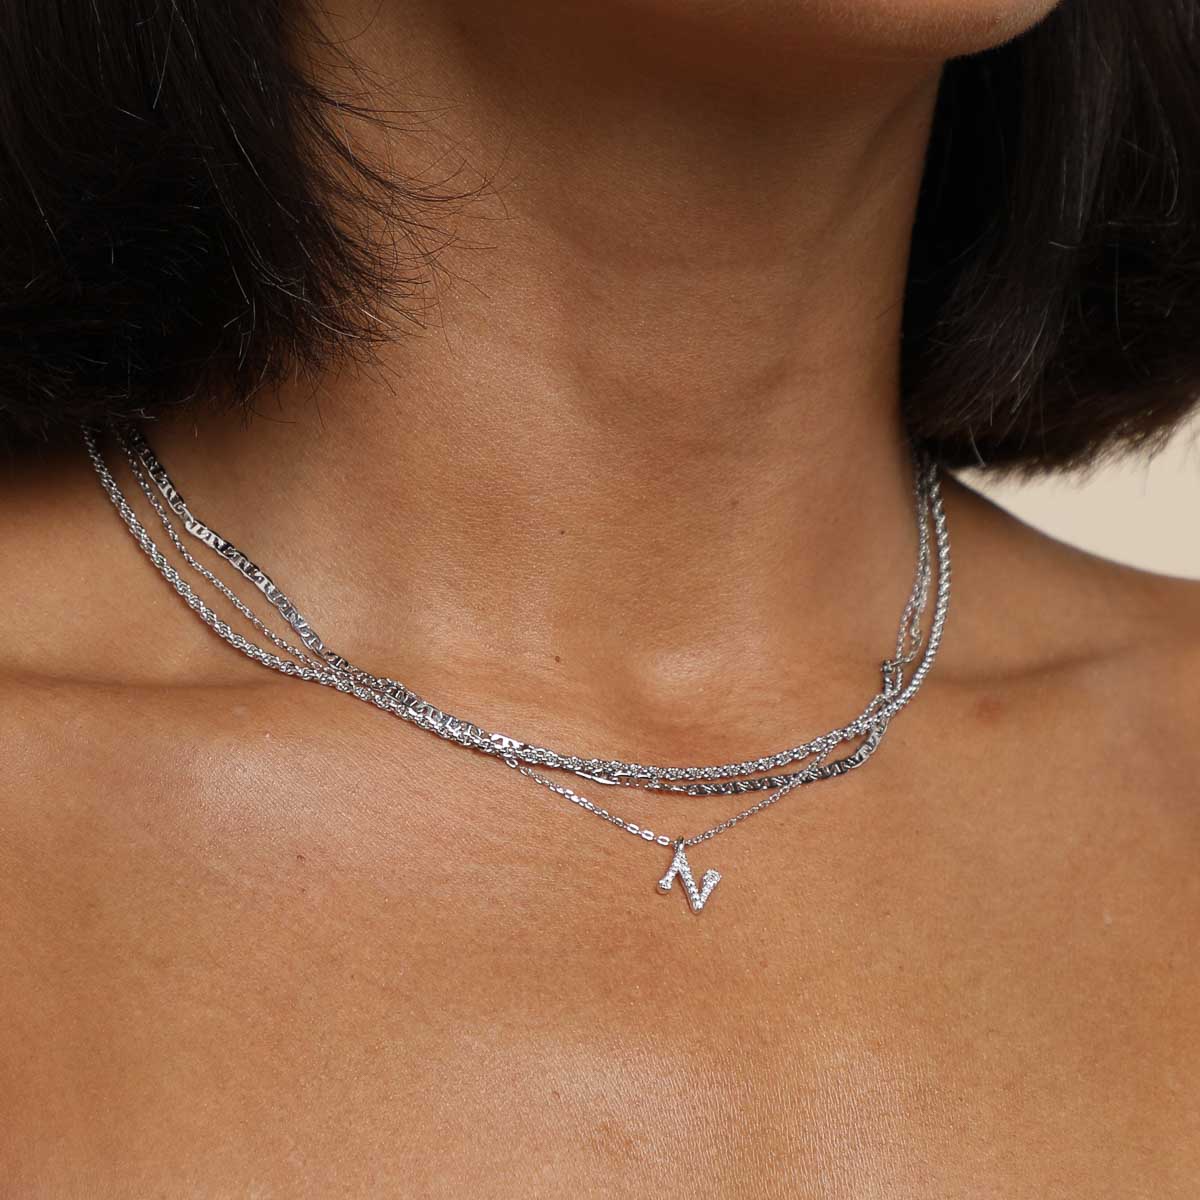 N Initial Pavé Pendant Necklace in Silver